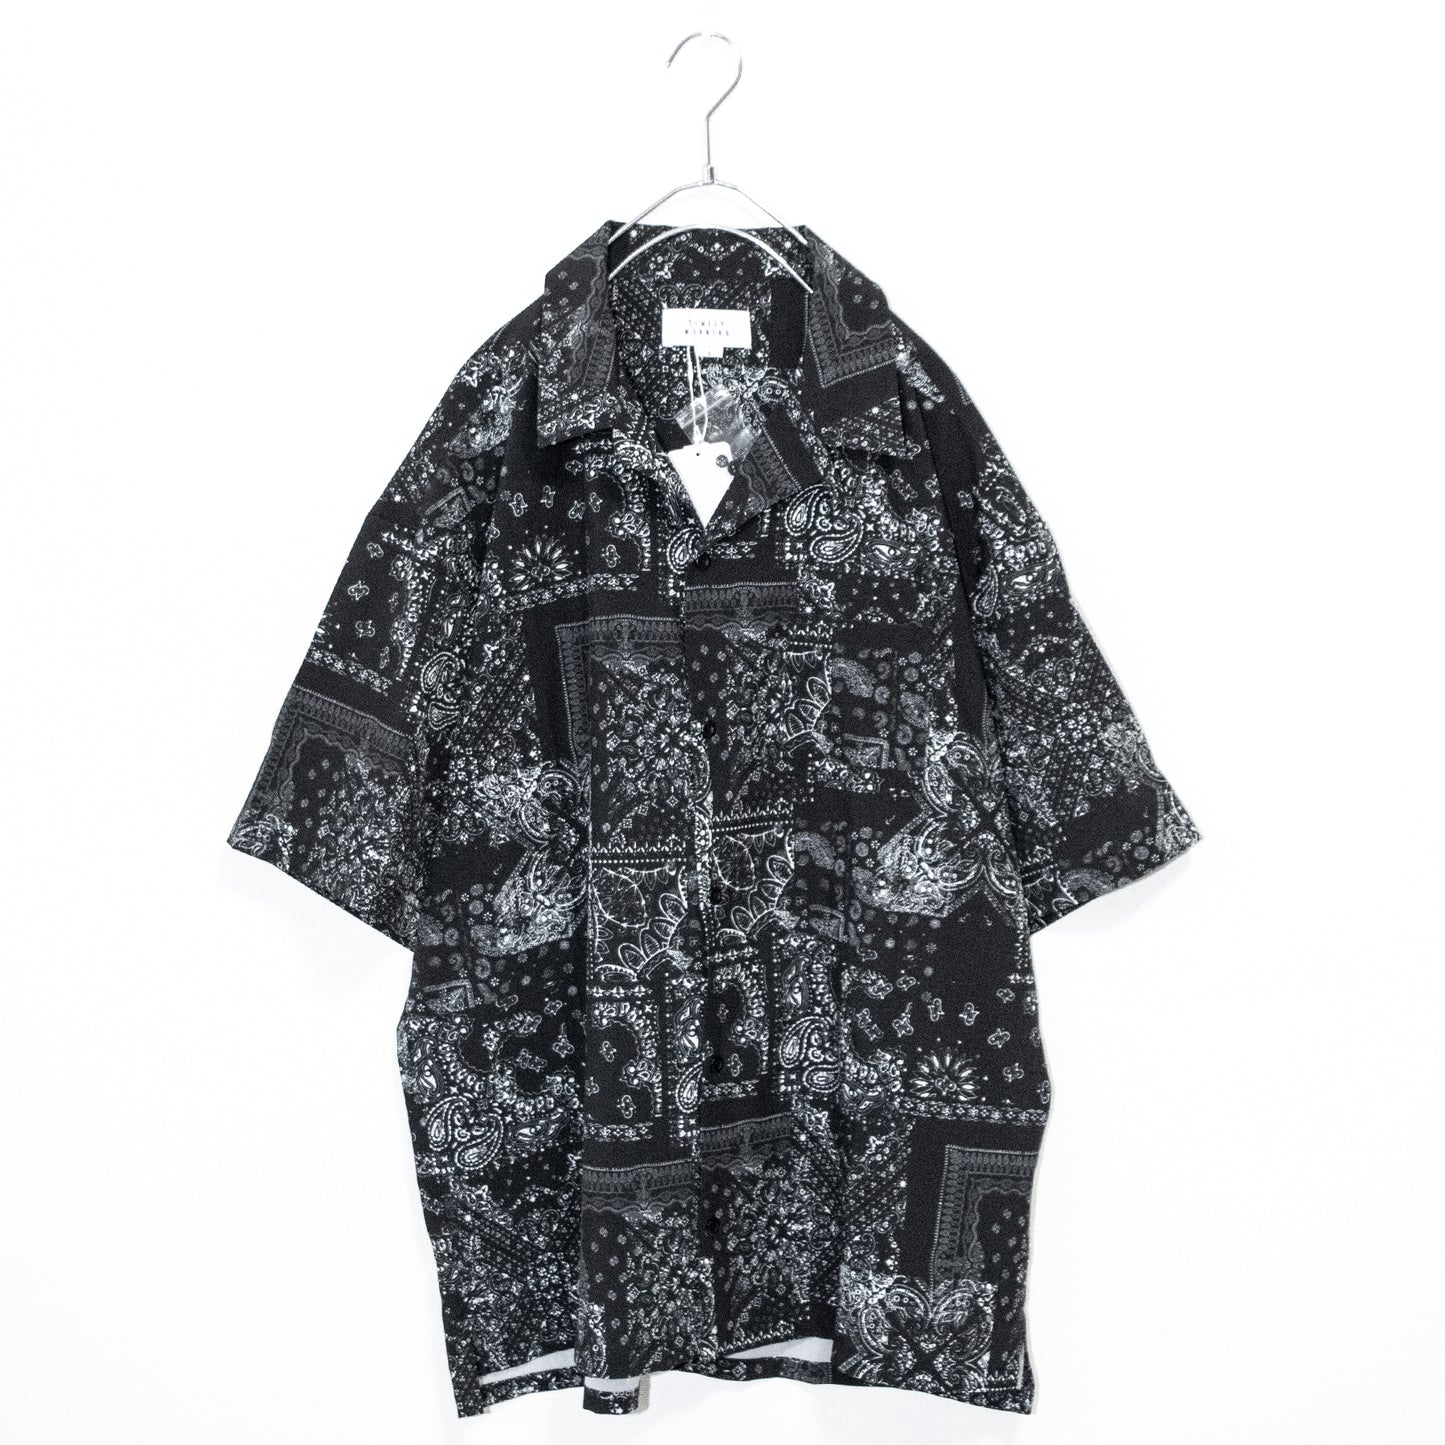 Bandana Open Collar S/S Shirt (2 color) - YOUAREMYPOISON